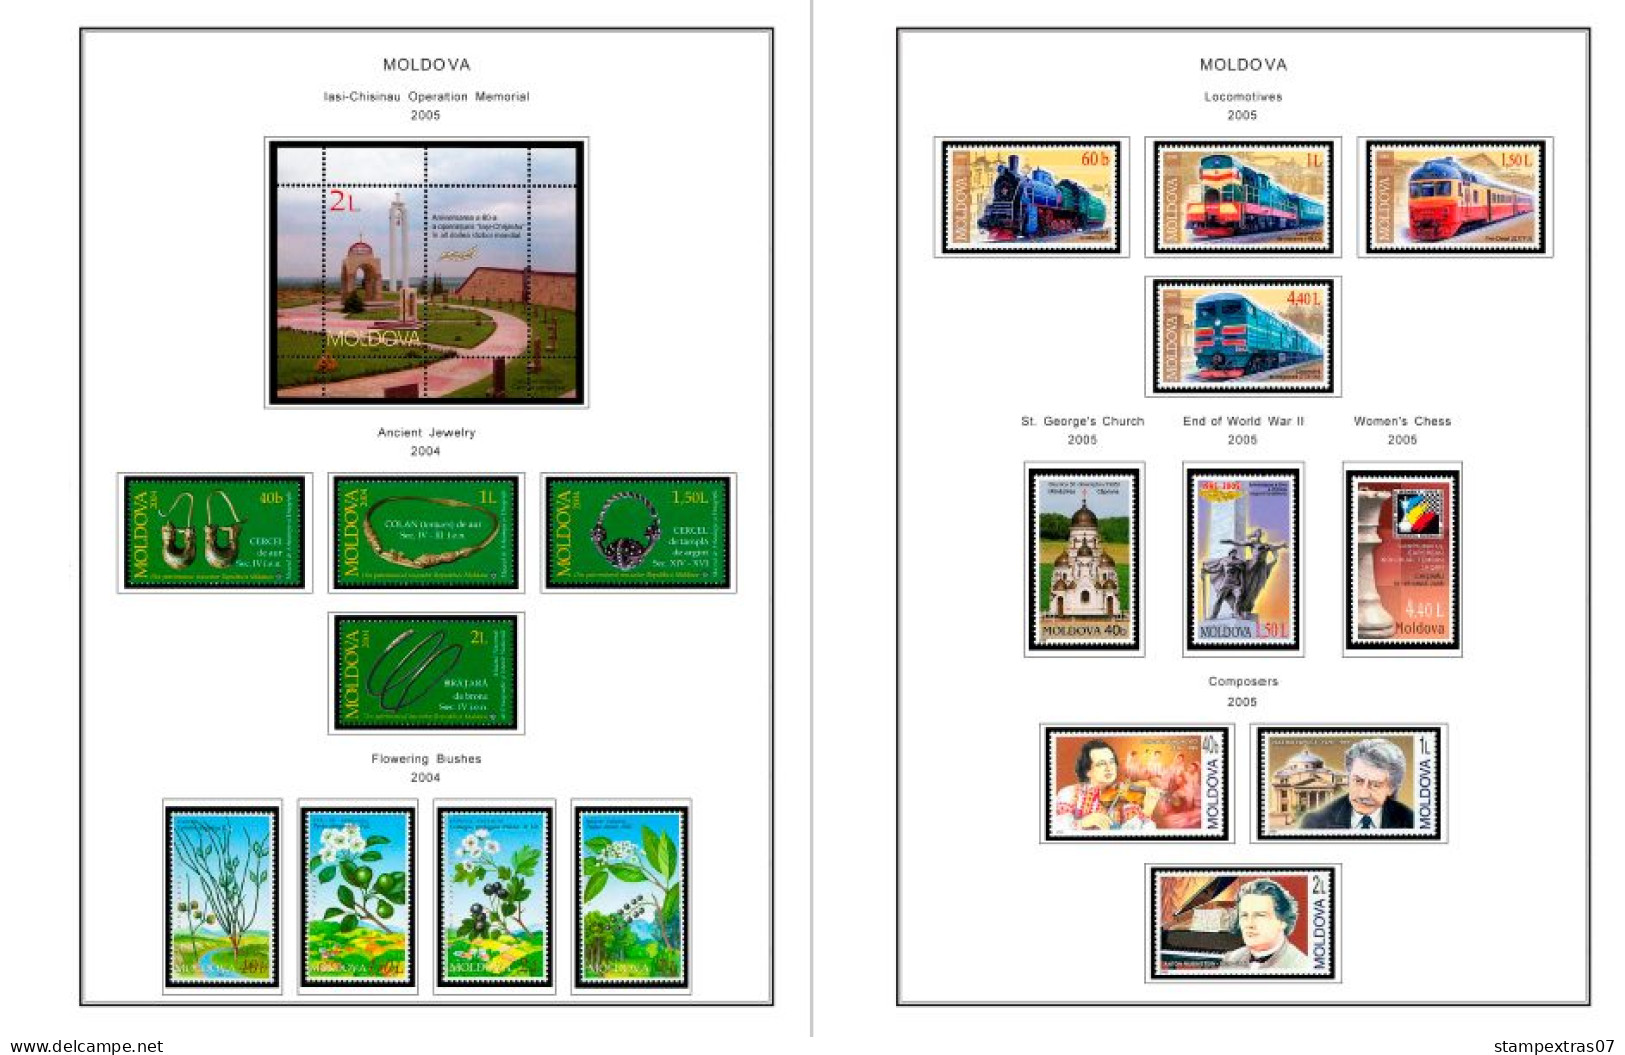 COLOR PRINTED MOLDOVA 1991-2010 STAMP ALBUM PAGES (92 illustrated pages) >> FEUILLES ALBUM